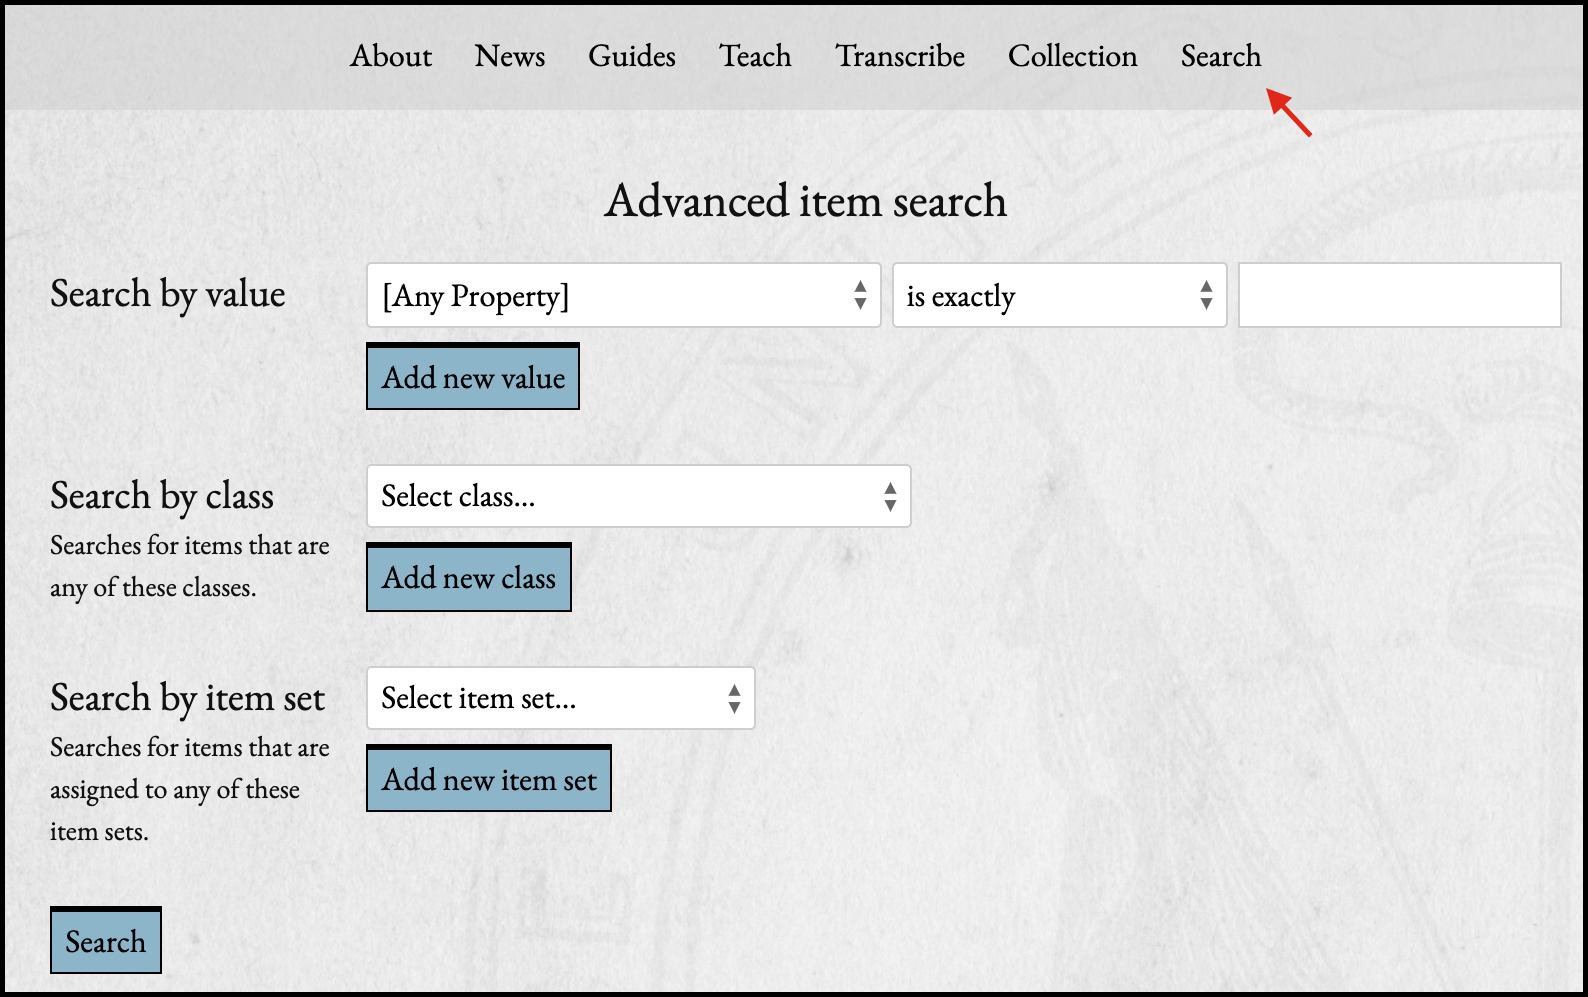 Screenshot of the advanced item search page. A red arrow points to the Search button in the main menu